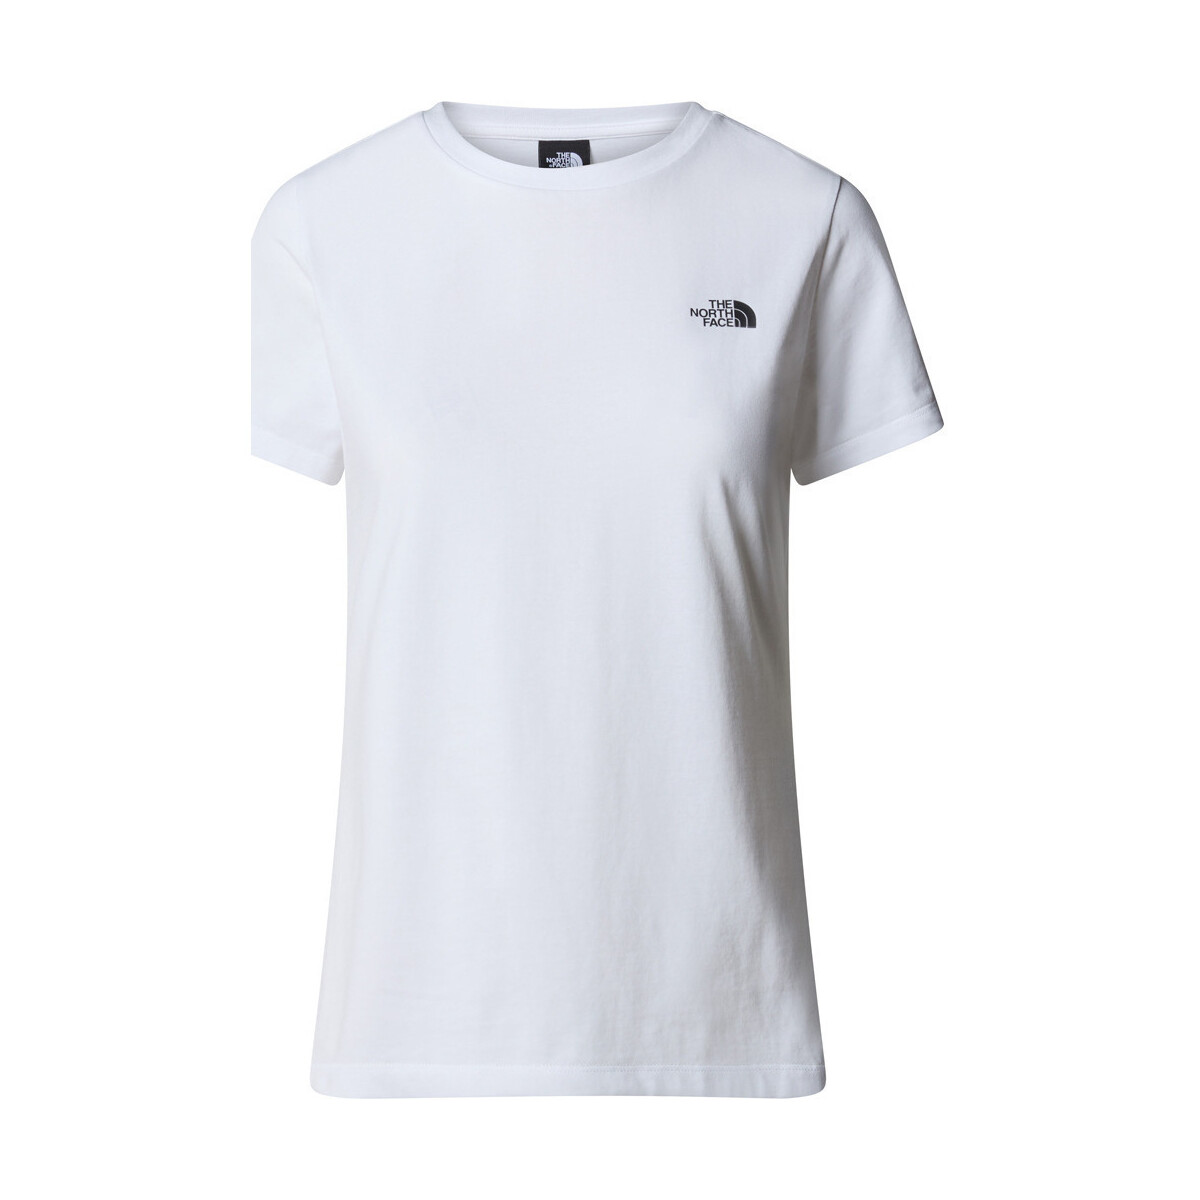 Vêtements Femme Chemises / Chemisiers The North Face W S/S SIMPLE DOME TEE Blanc